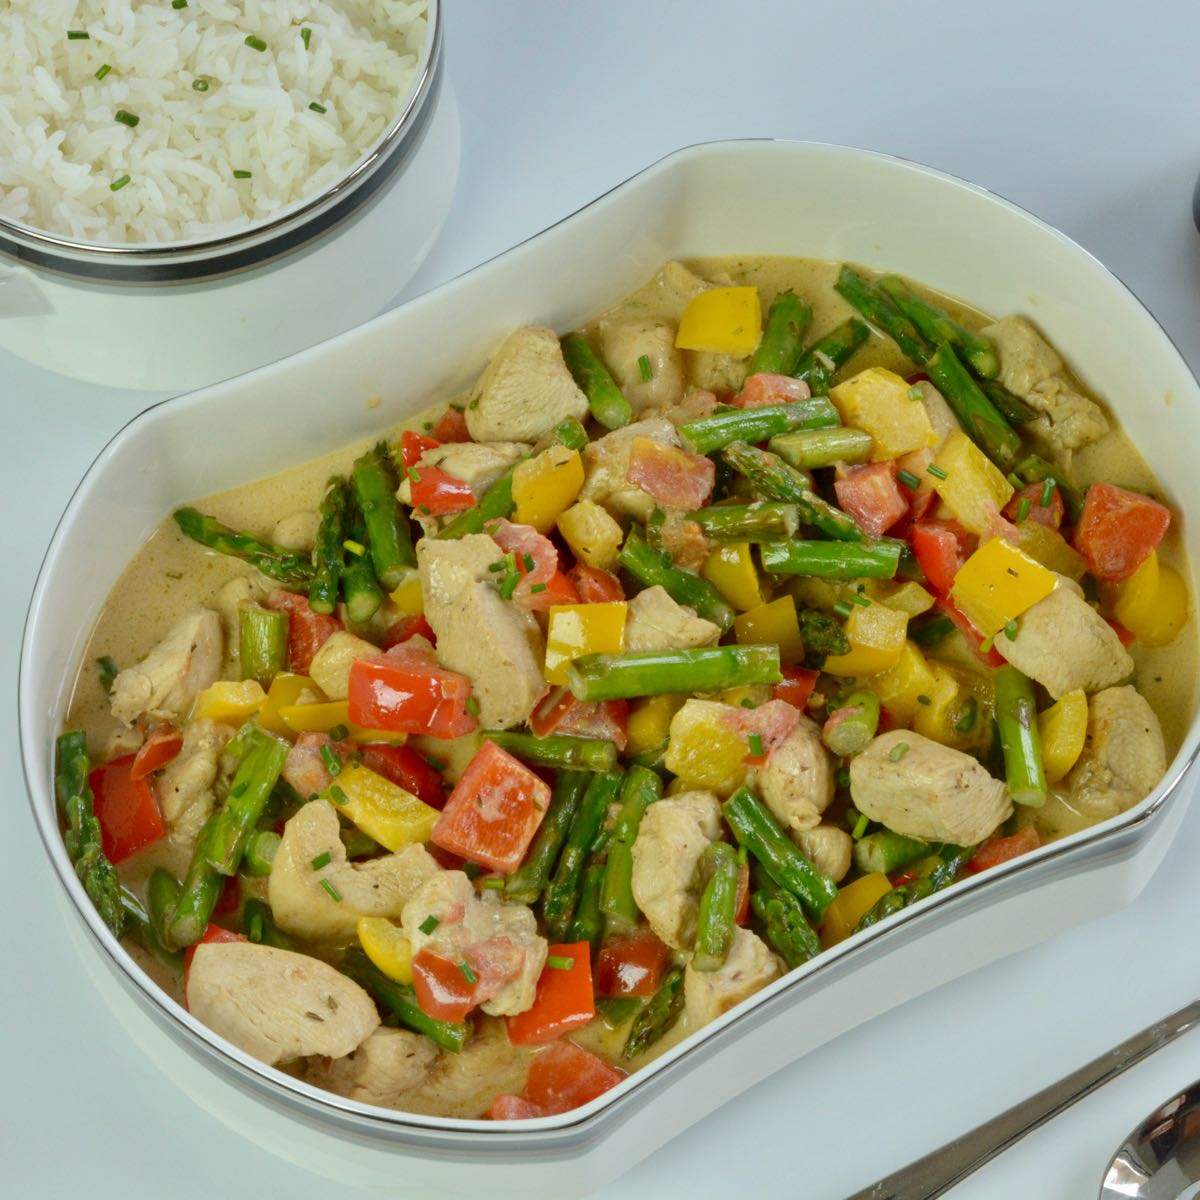 A serving dish of Chicken in Madeira Cream Sauce with asparagus, red and yellow peppers plus a side dish of rice.